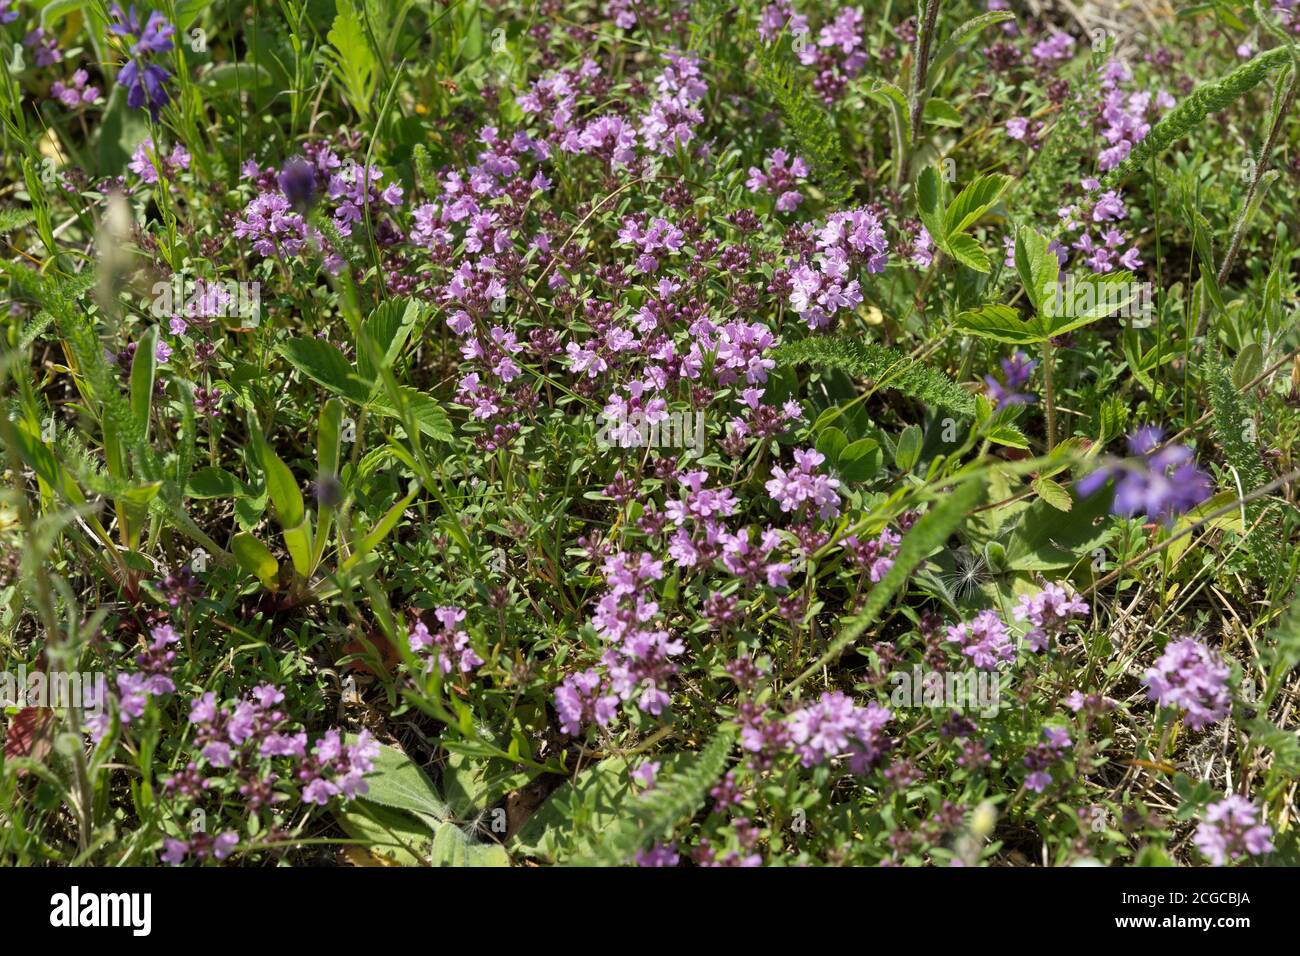 Medicinal shrub thyme plant (Thymus serpyllum) creeping grows on a green meadow in summer. Stock Photo